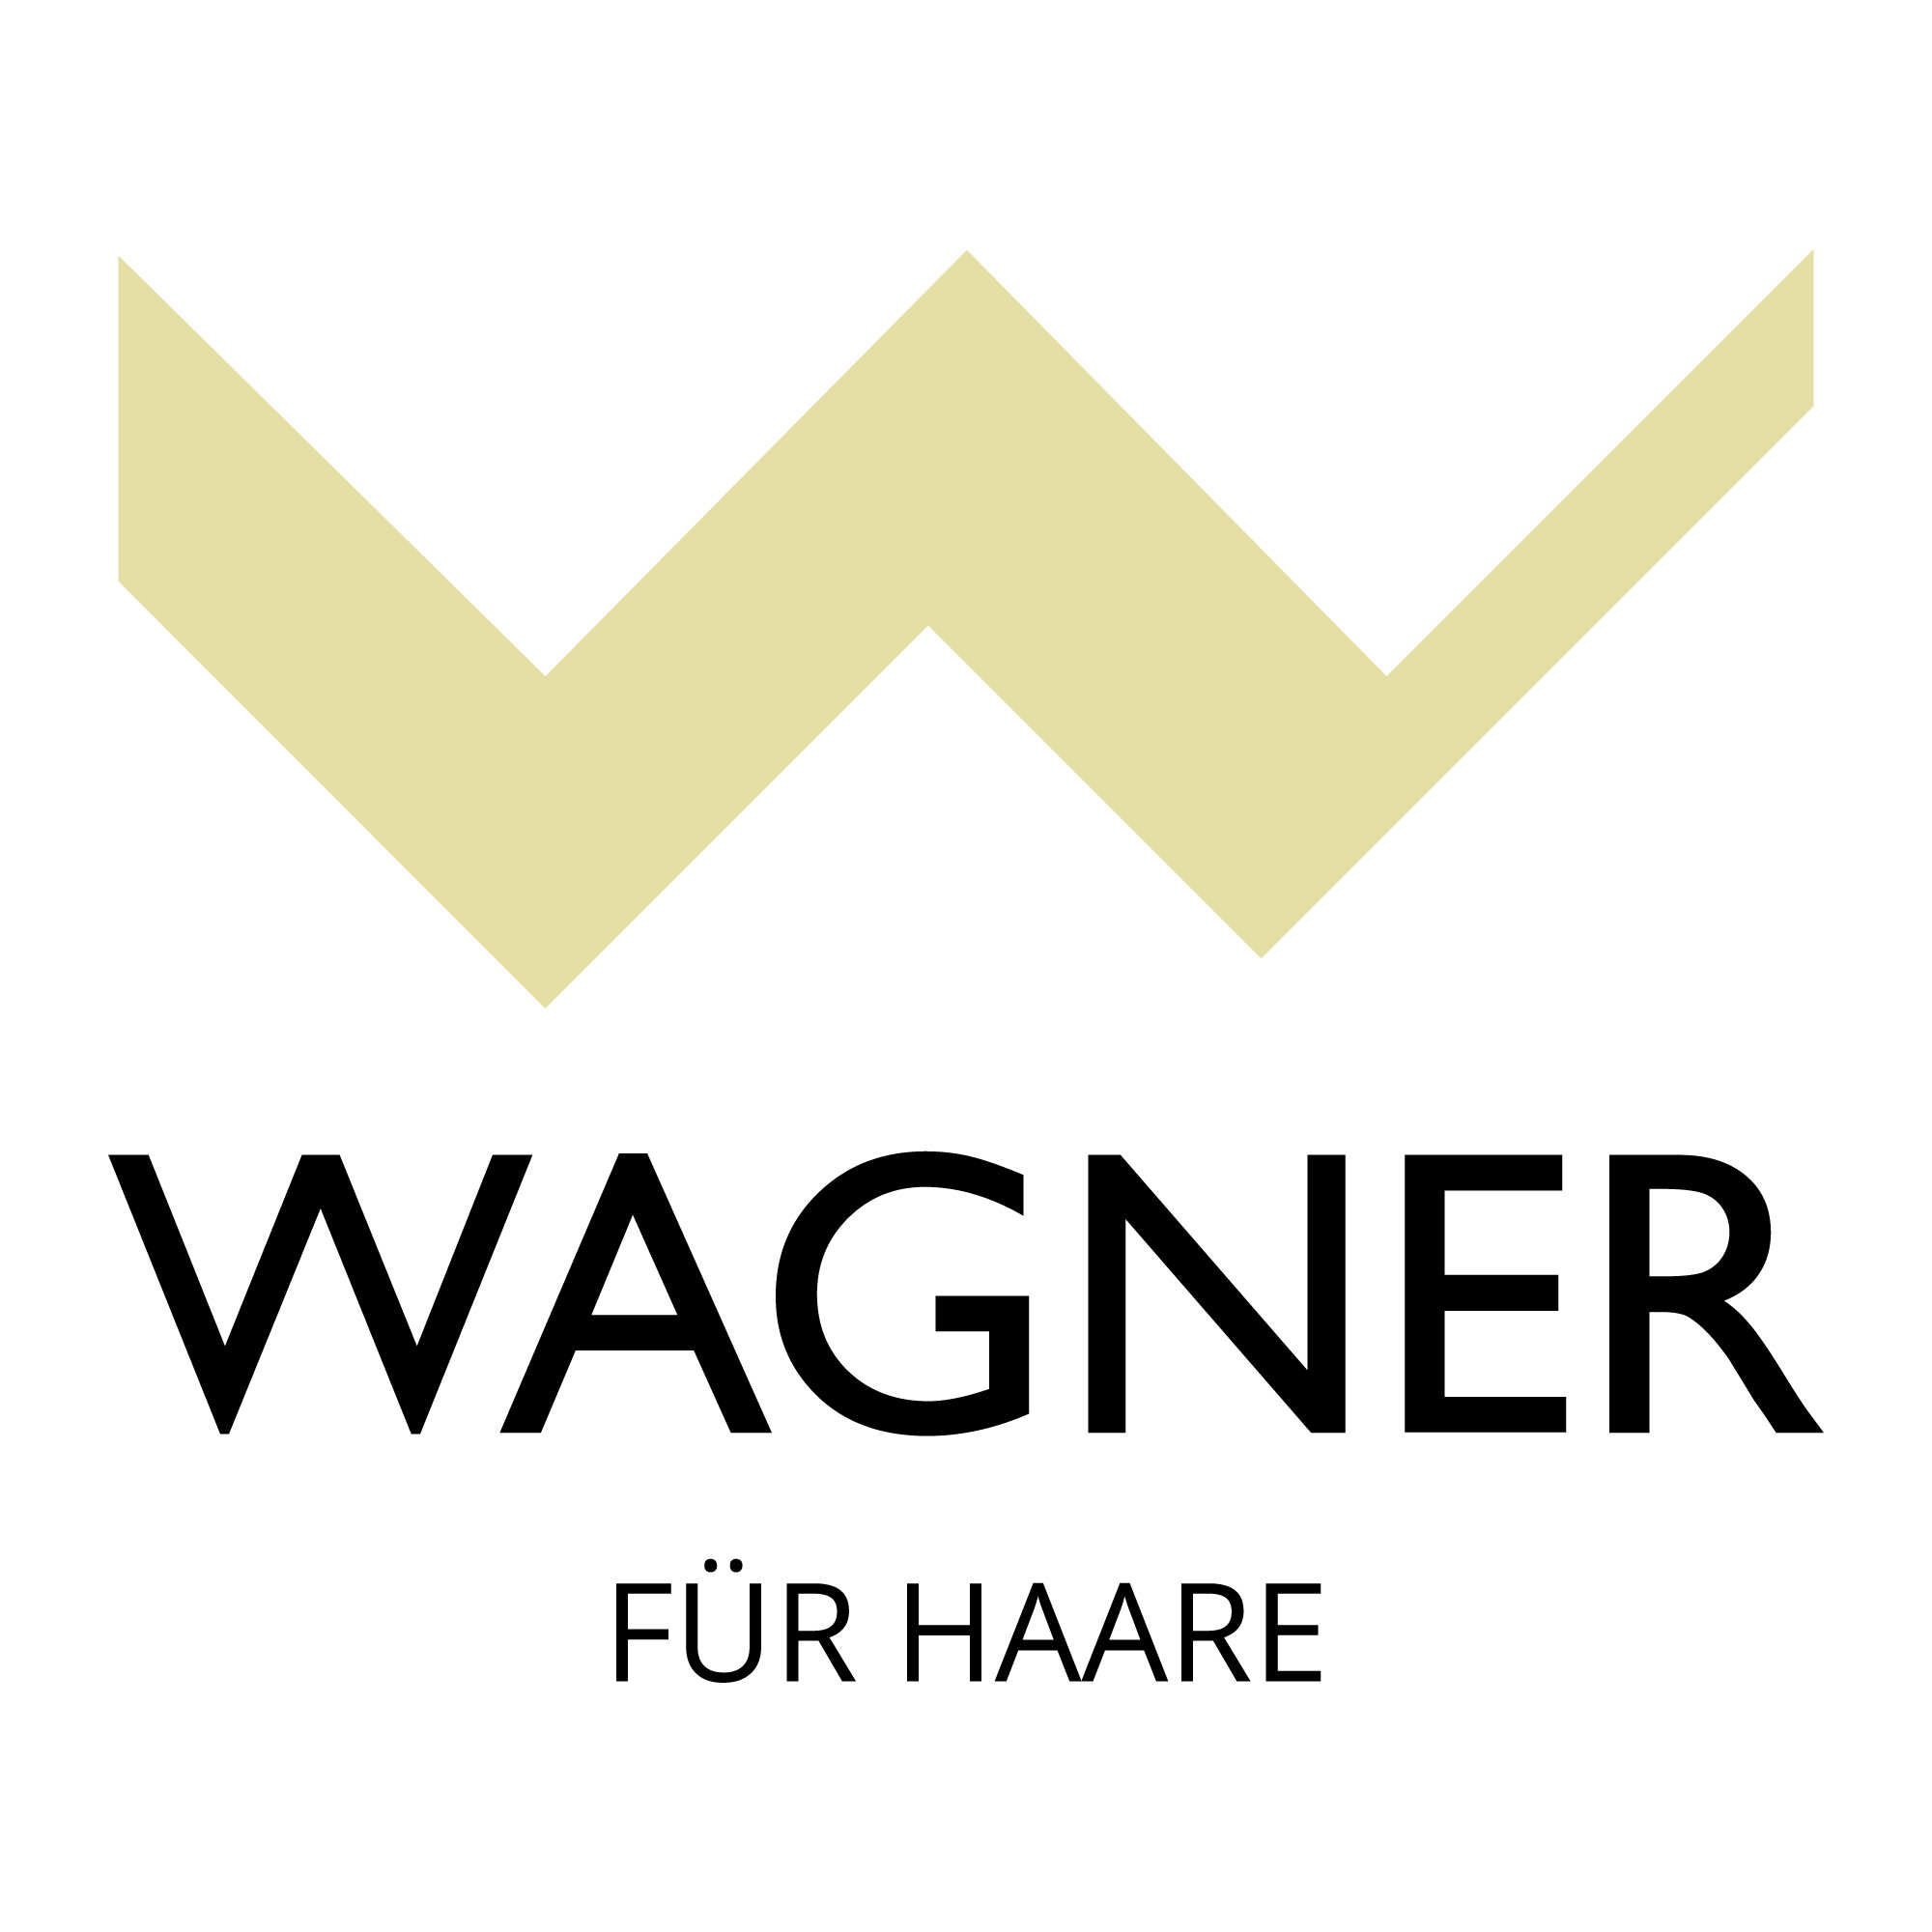 (c) Wagnerfuerhaare.at